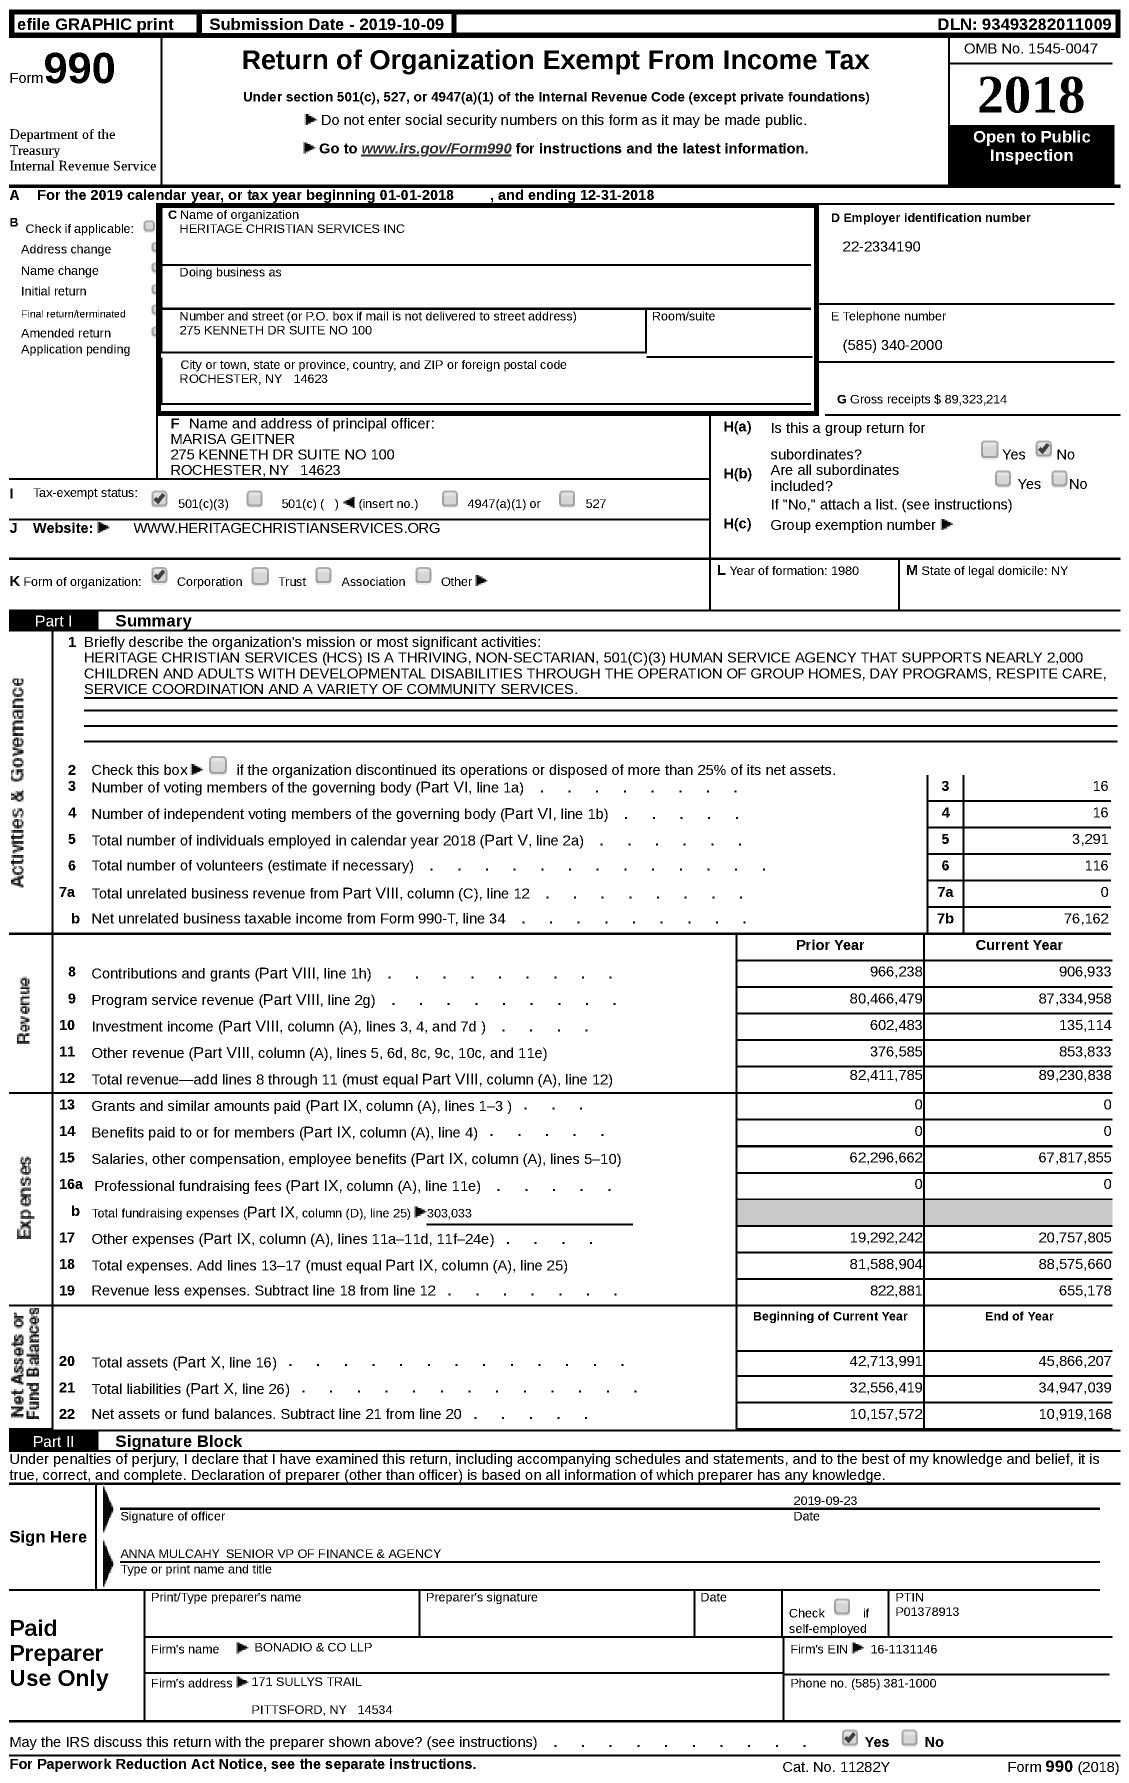 Image of first page of 2018 Form 990 for Heritage Christian Services (HCS)